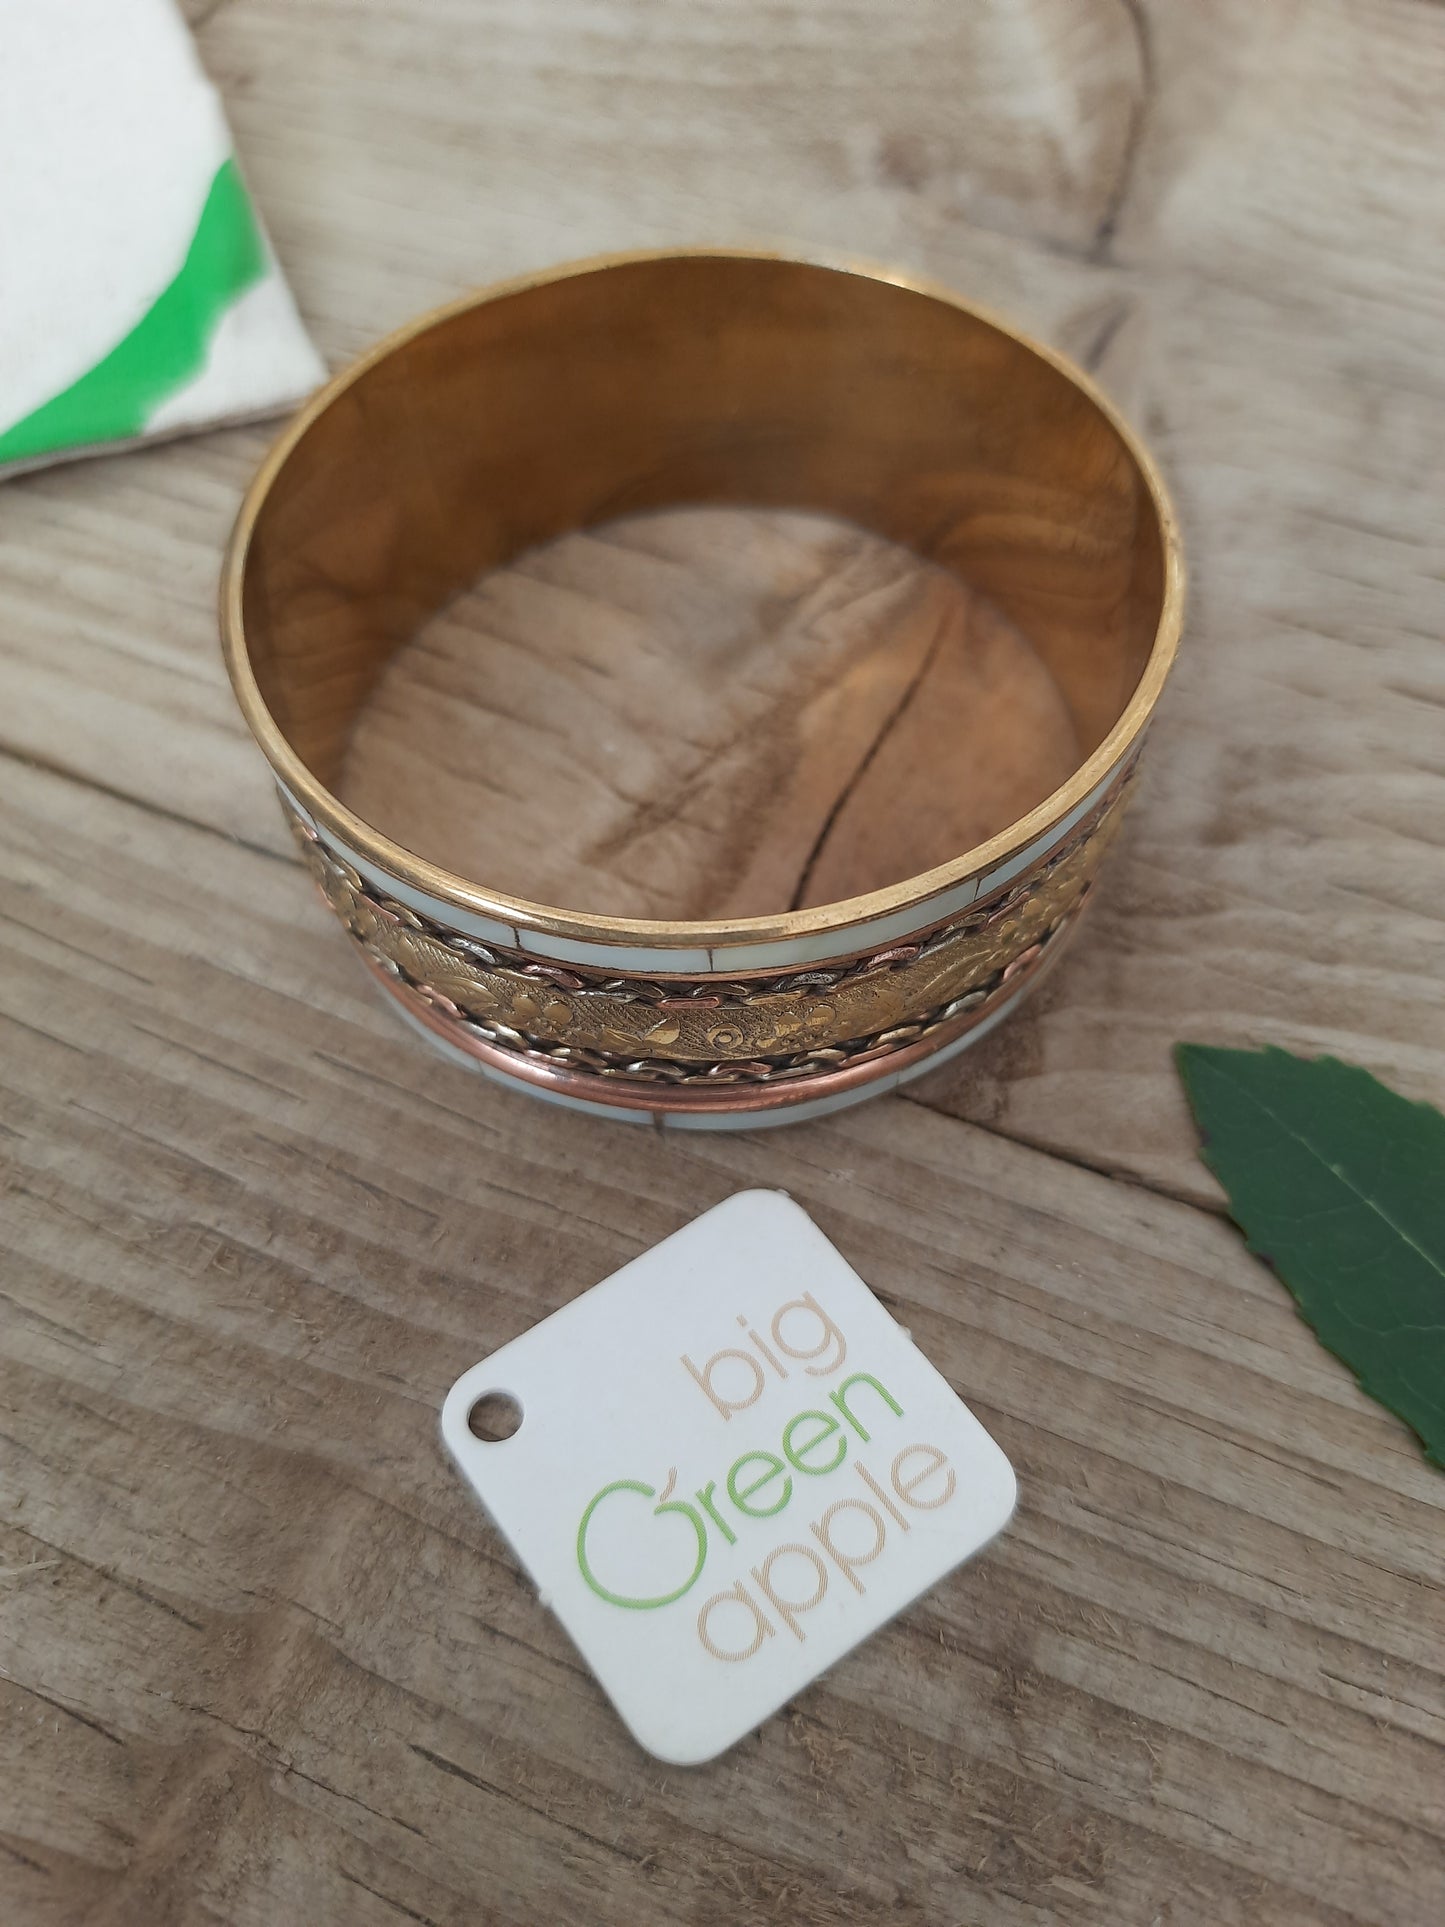 Ethical Jewellery | Delightful Bangle | Ethical Gifts For Her | Fair Trade Jewellery